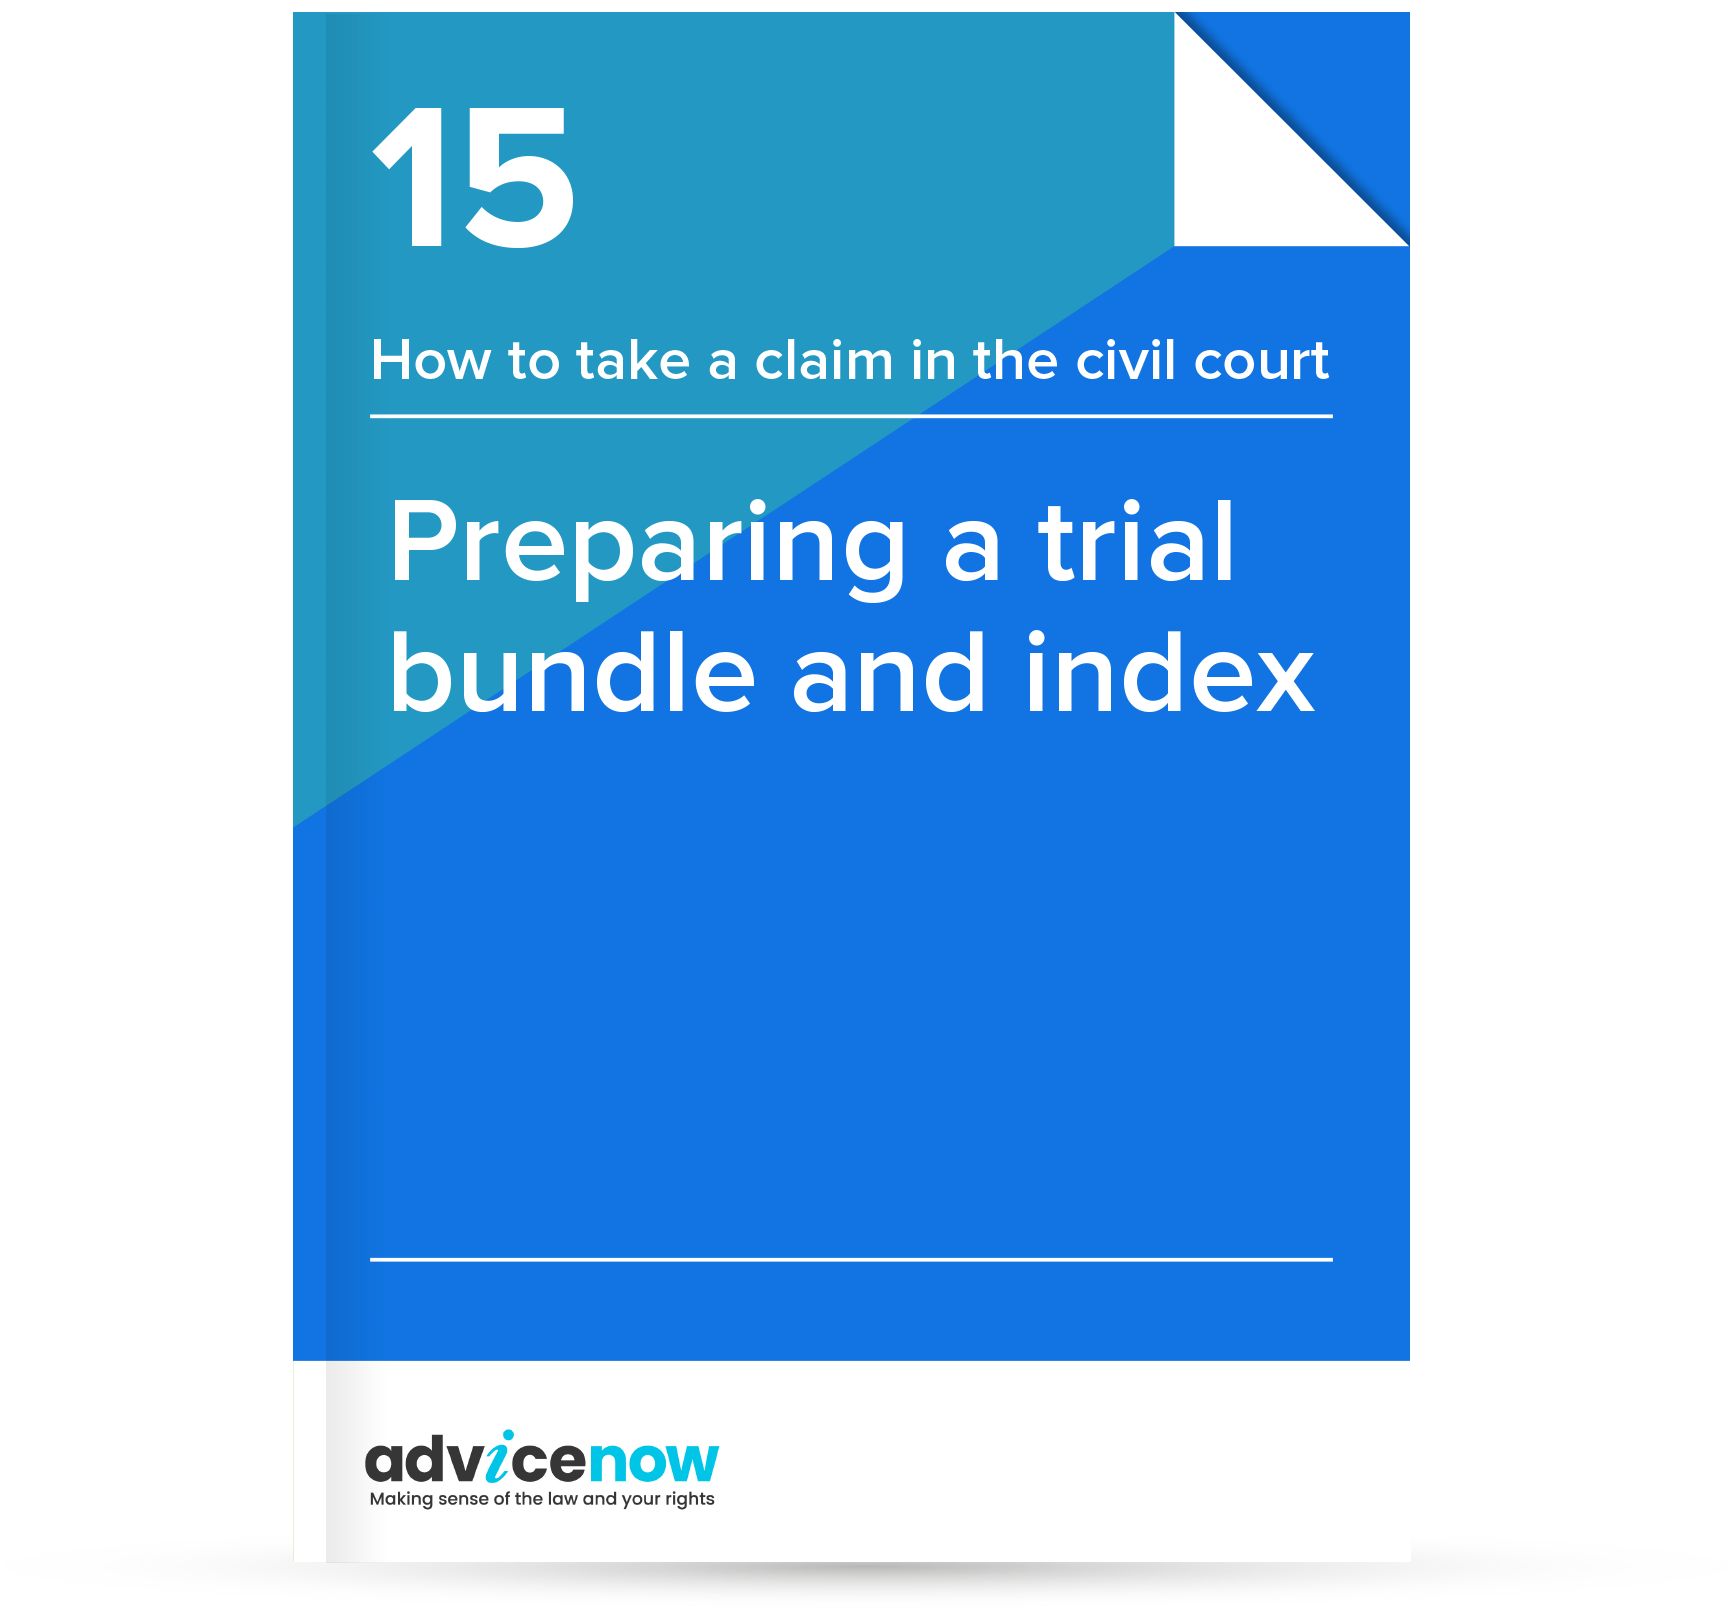 How to prepare a trial bundle and index | Advicenow